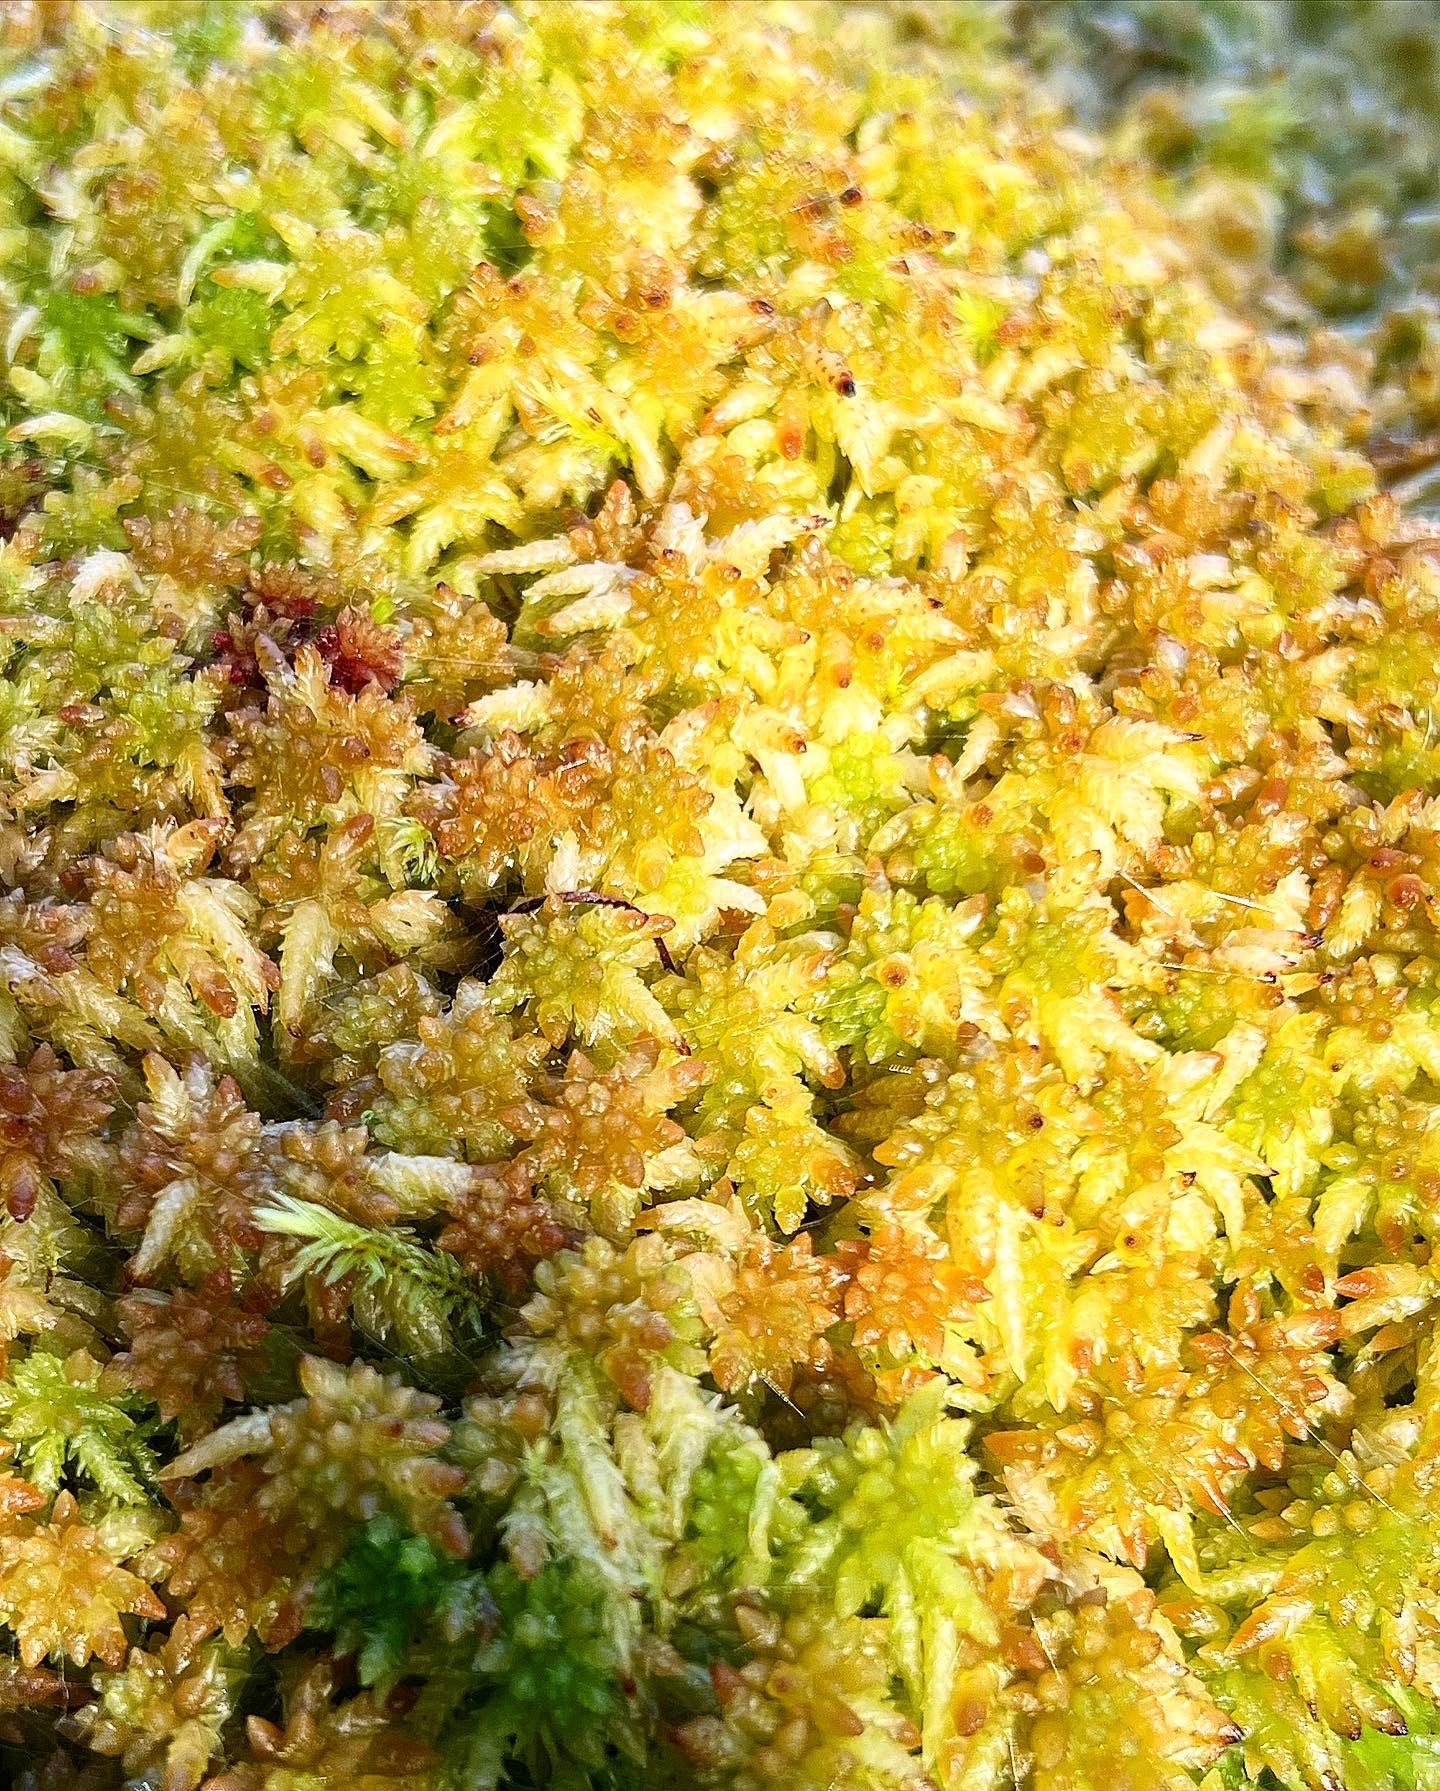 Buy Sphagnum Moss for sale